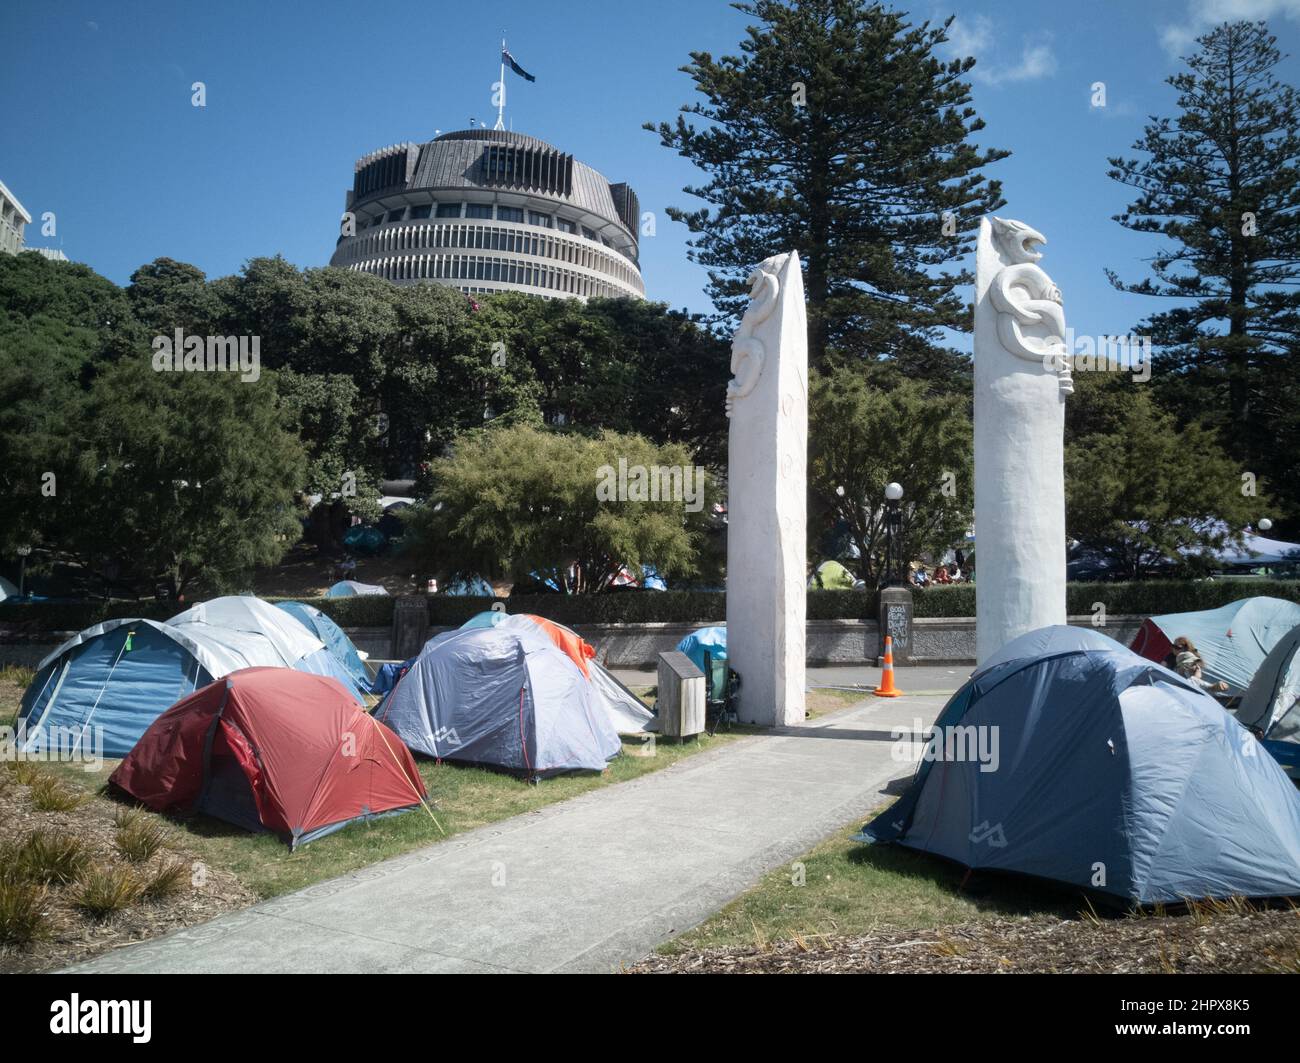 Protestor tents outside parliament grounds in Wellington, New Zealand. People protest the covid vaccine mandates on day 17 of the occupation. Stock Photo